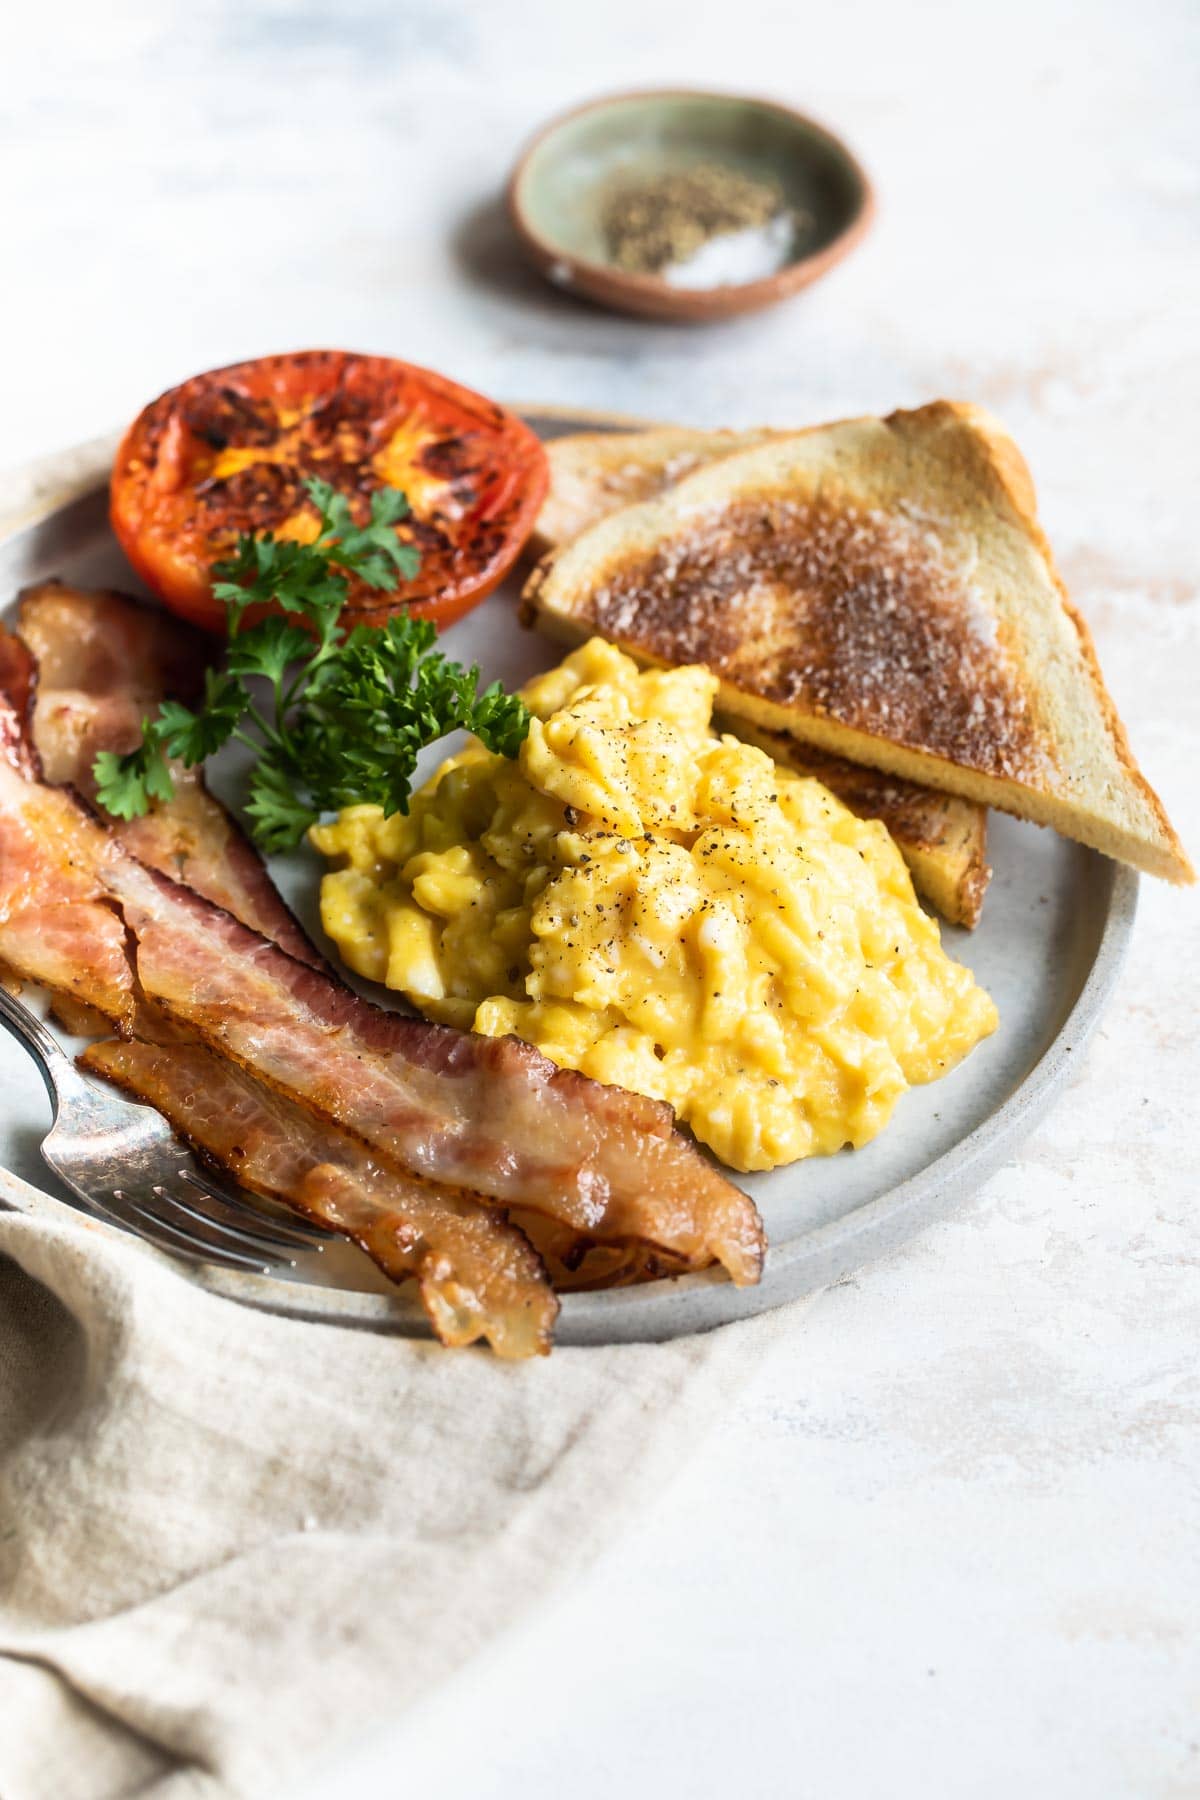 Scrambled eggs on a plate with toast triangles, bacon slices, parsley, and a roasted tomato.